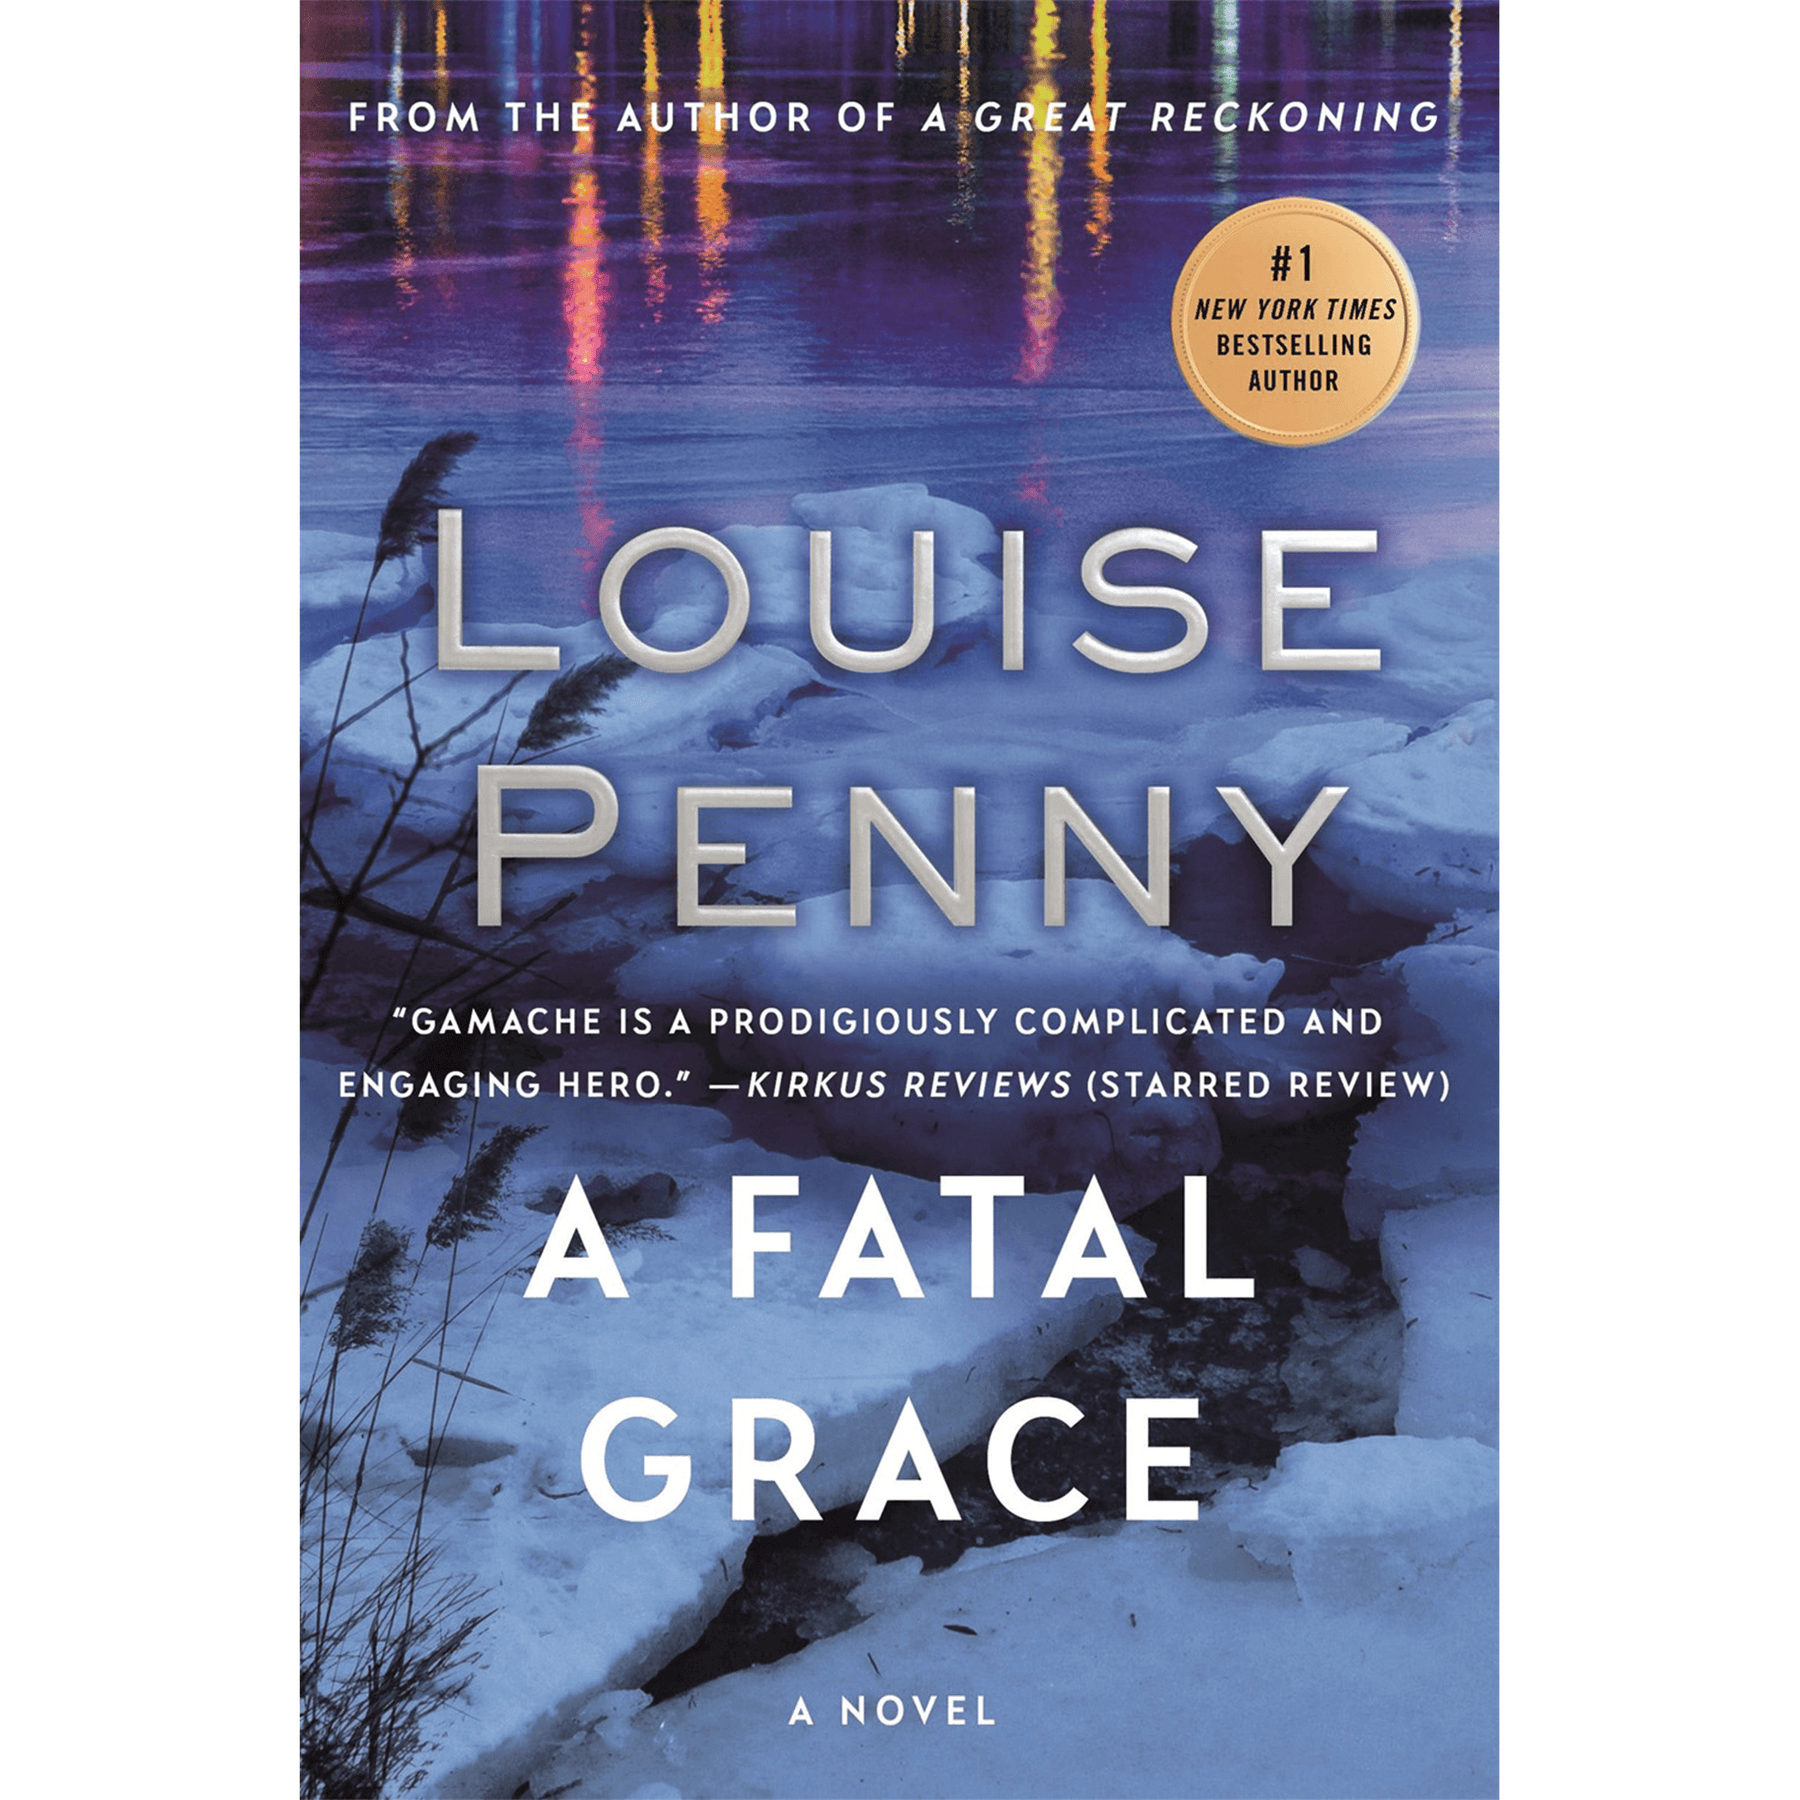 Bury Your Dead (Chief Inspector Armand Gamache, #6) by Louise Penny